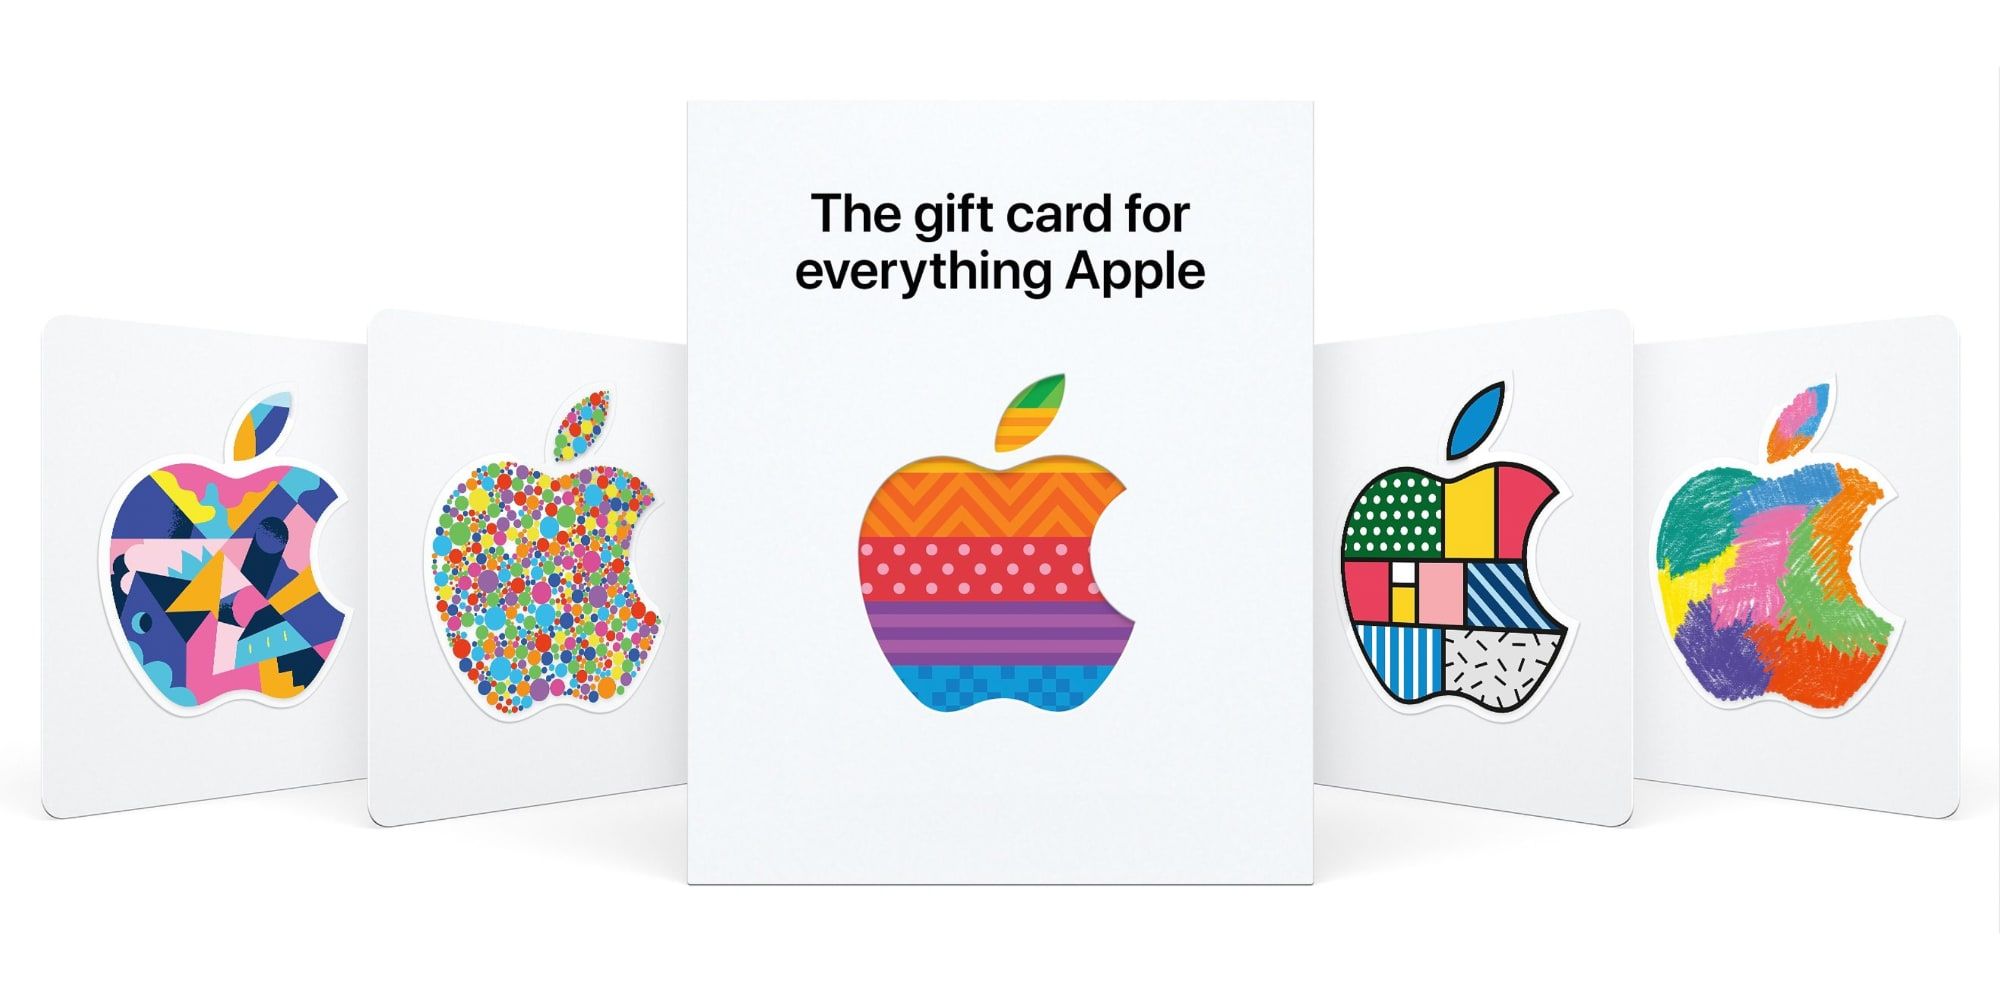 Apple Gift Cards: How to Use and Spend Them